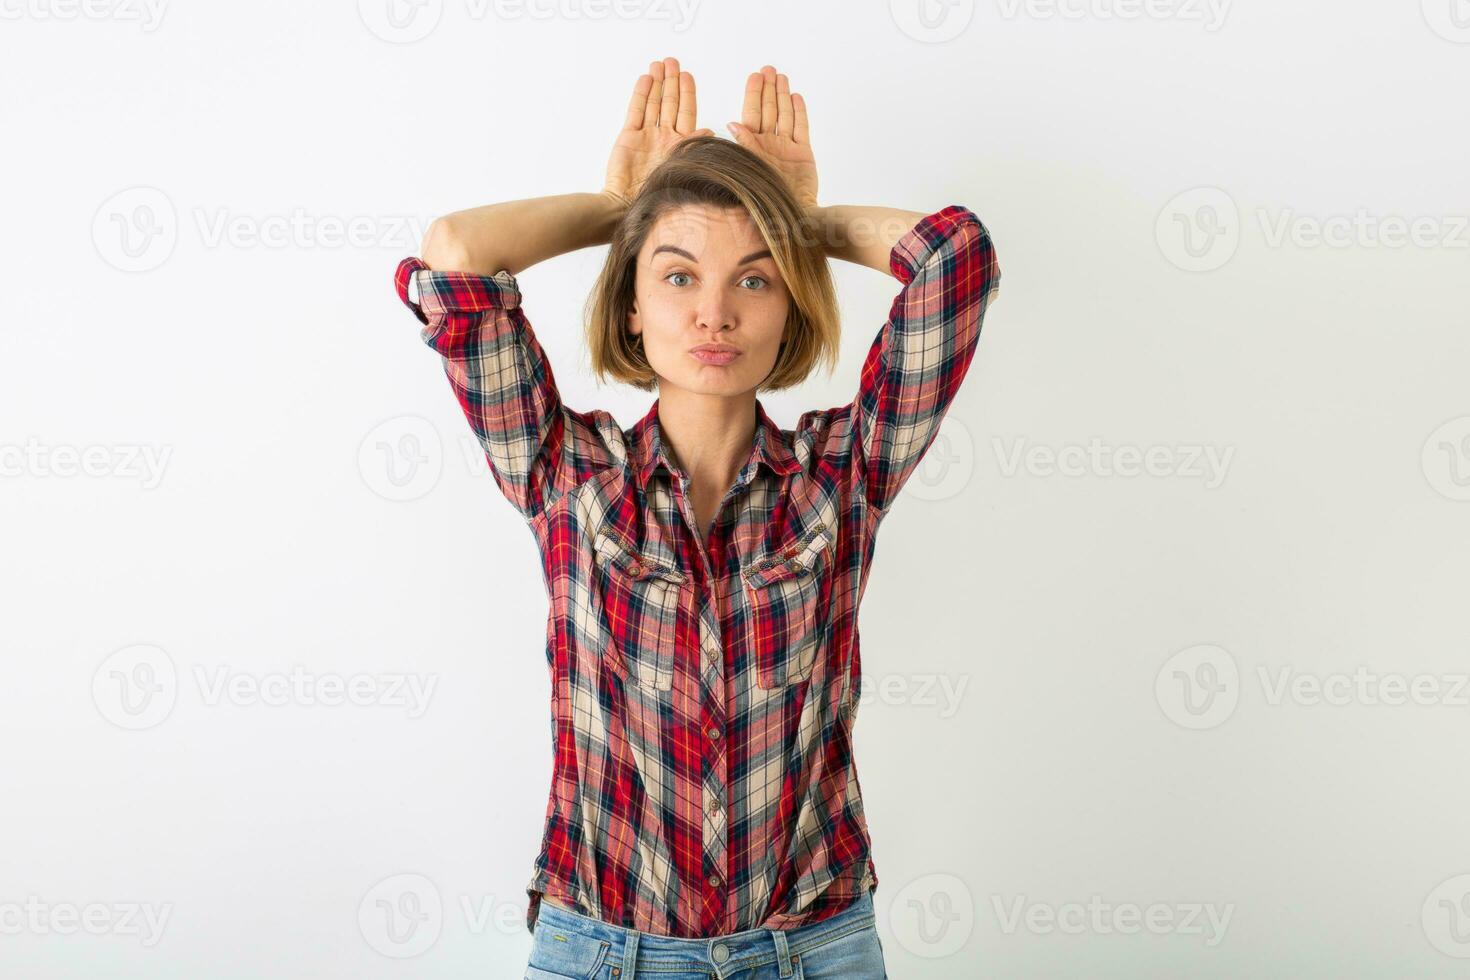 young emotional woman in checkered shirt photo